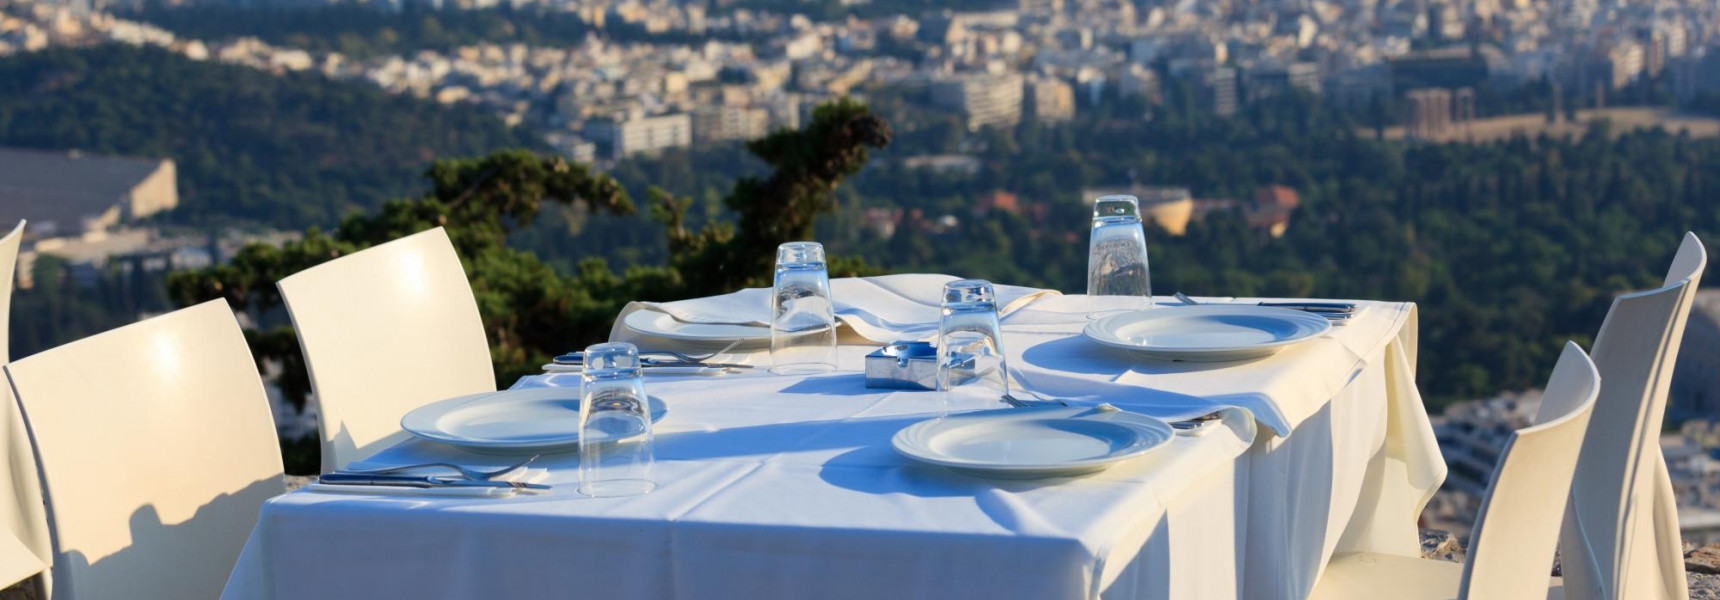 Top 5 FAQs about Athens Food and Drink